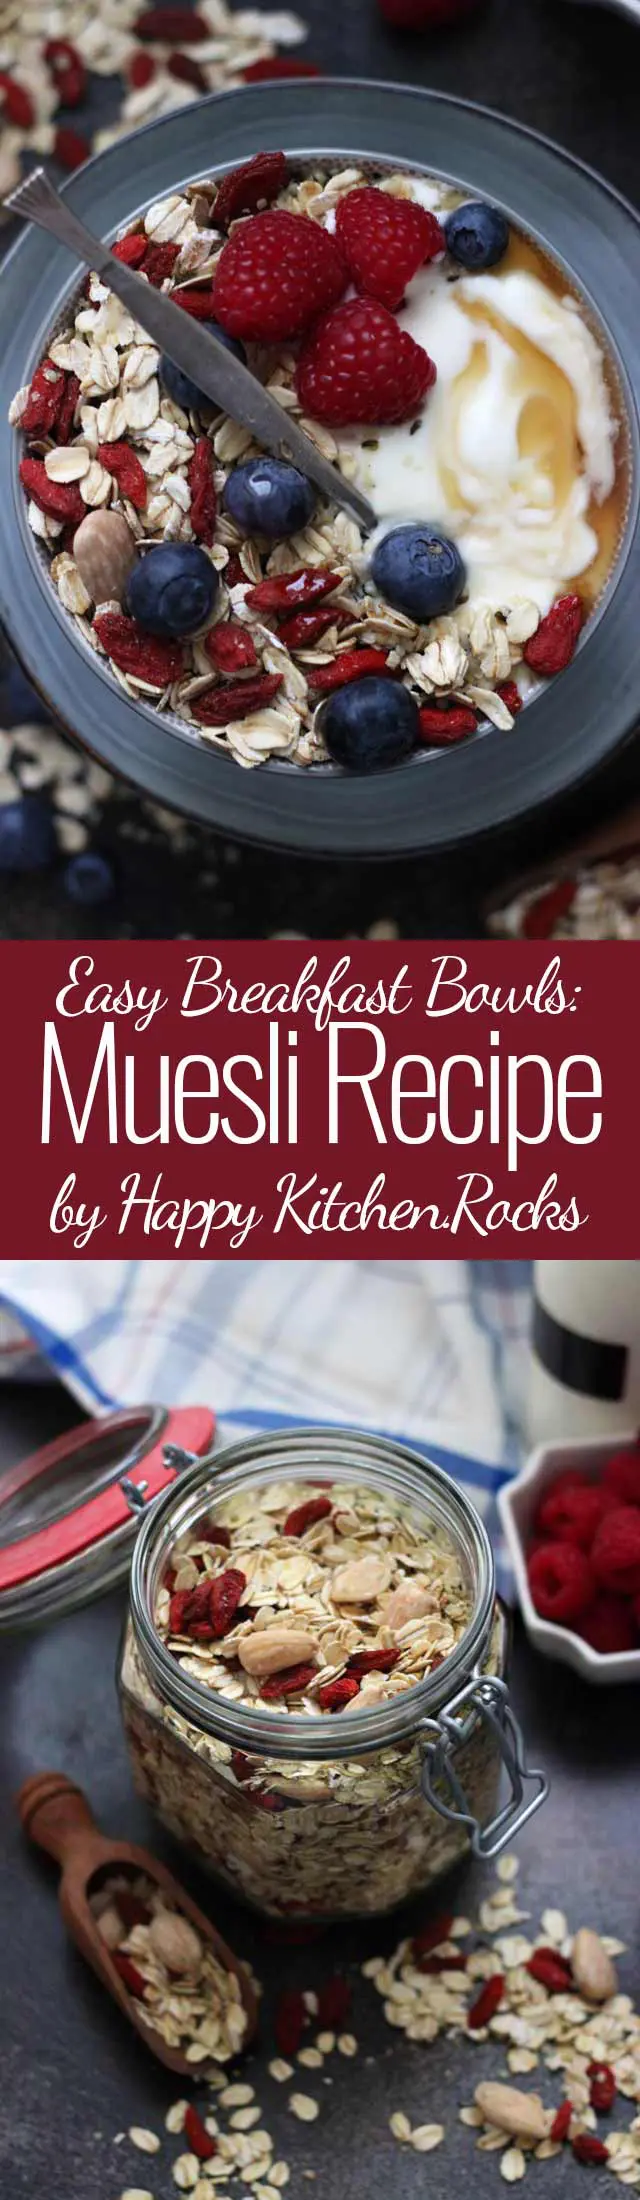 Muesli Recipe: A Healthy and Delicious Breakfast Idea Super Long Collage with Text Overlay